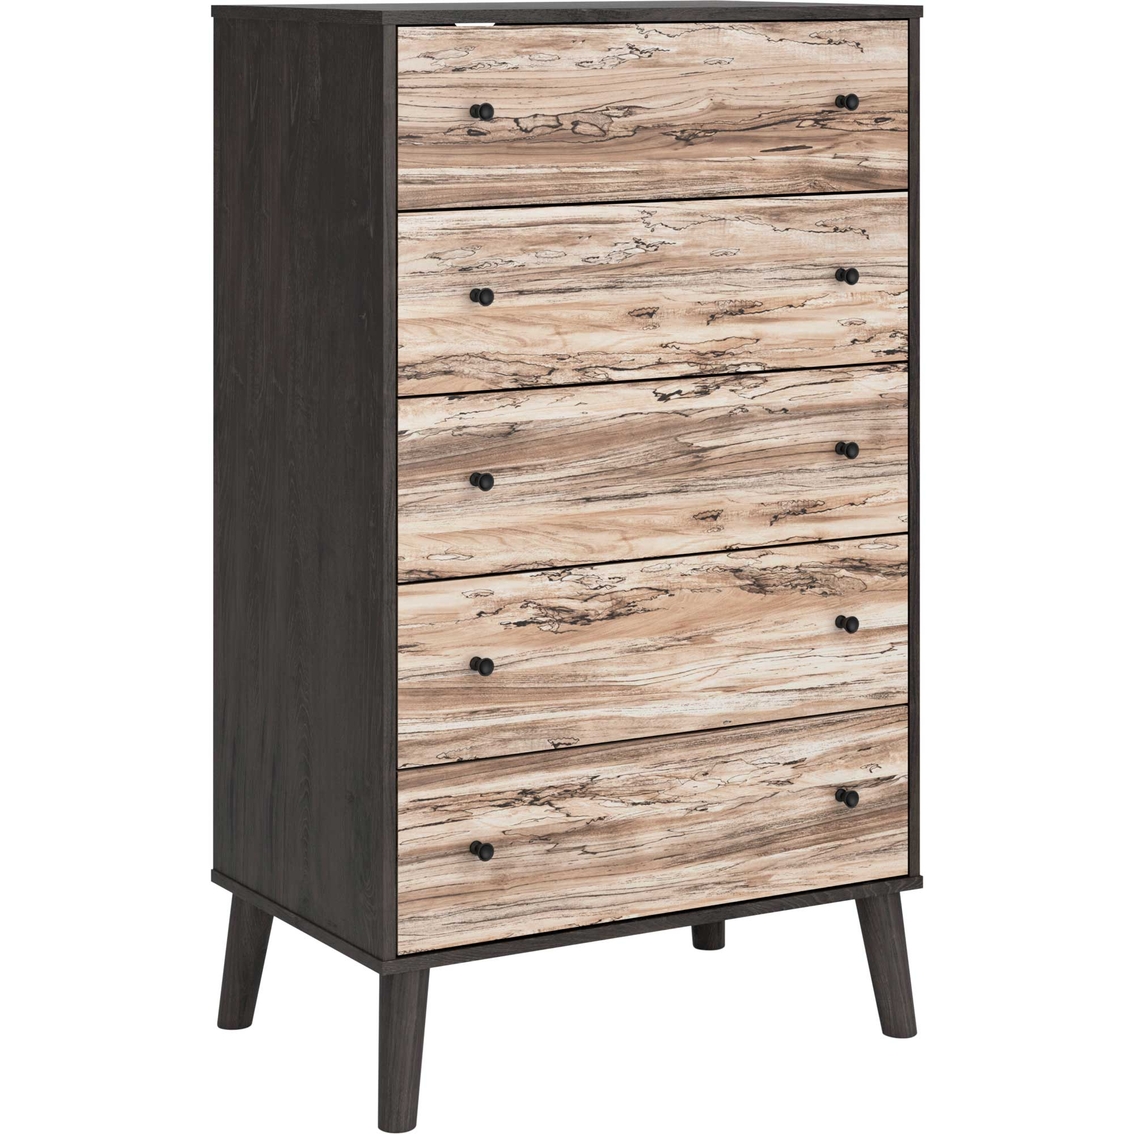 Signature Design by Ashley Ready To Assemble Piperton Chest of Drawers - Image 3 of 6